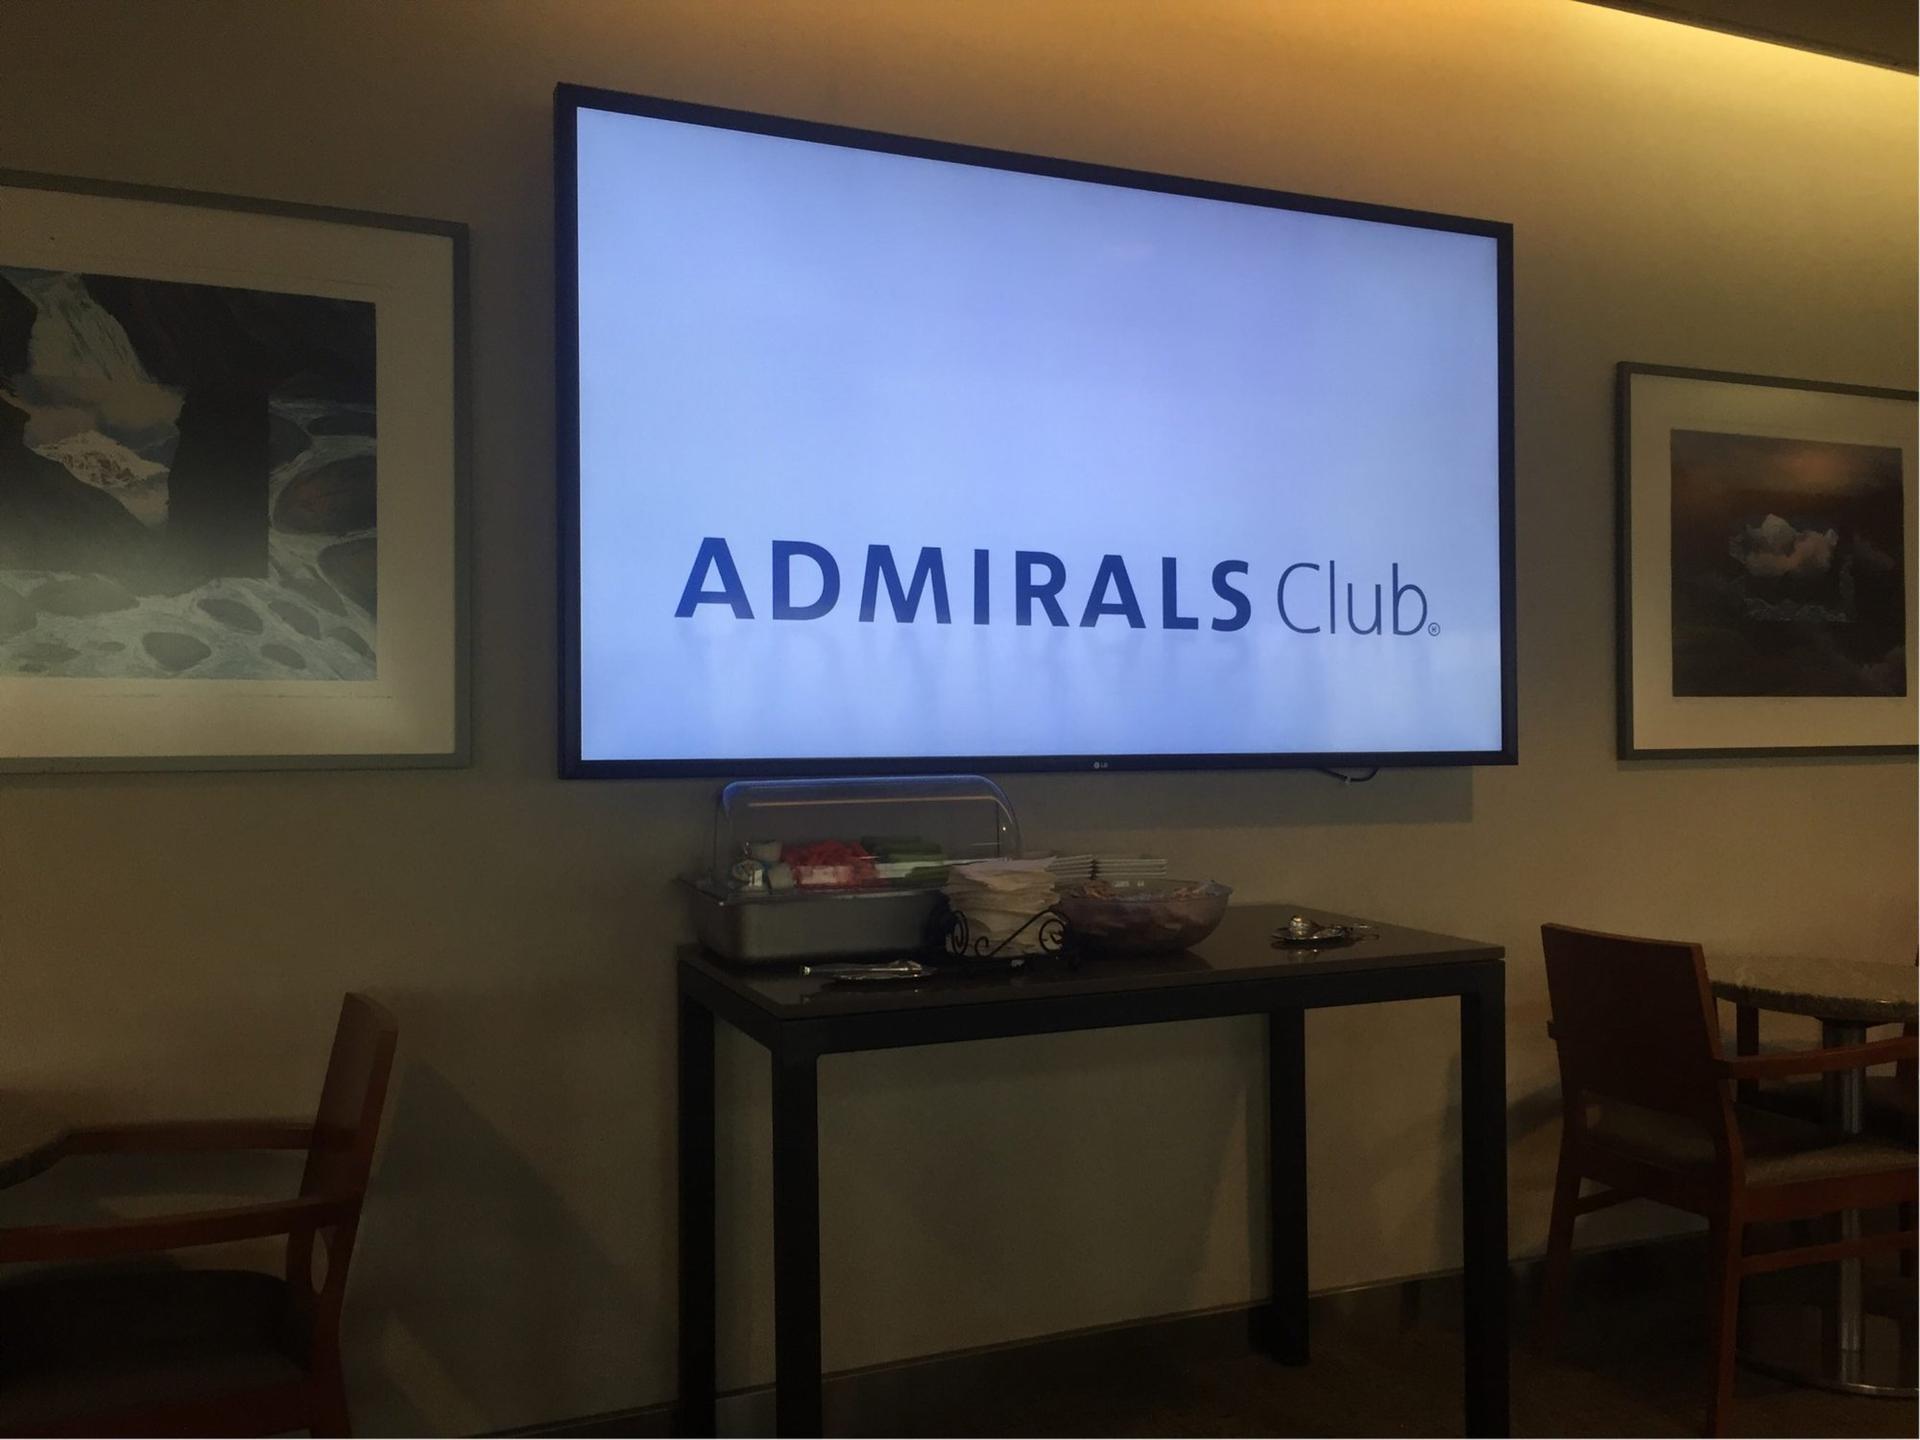 American Airlines Admirals Club image 48 of 48